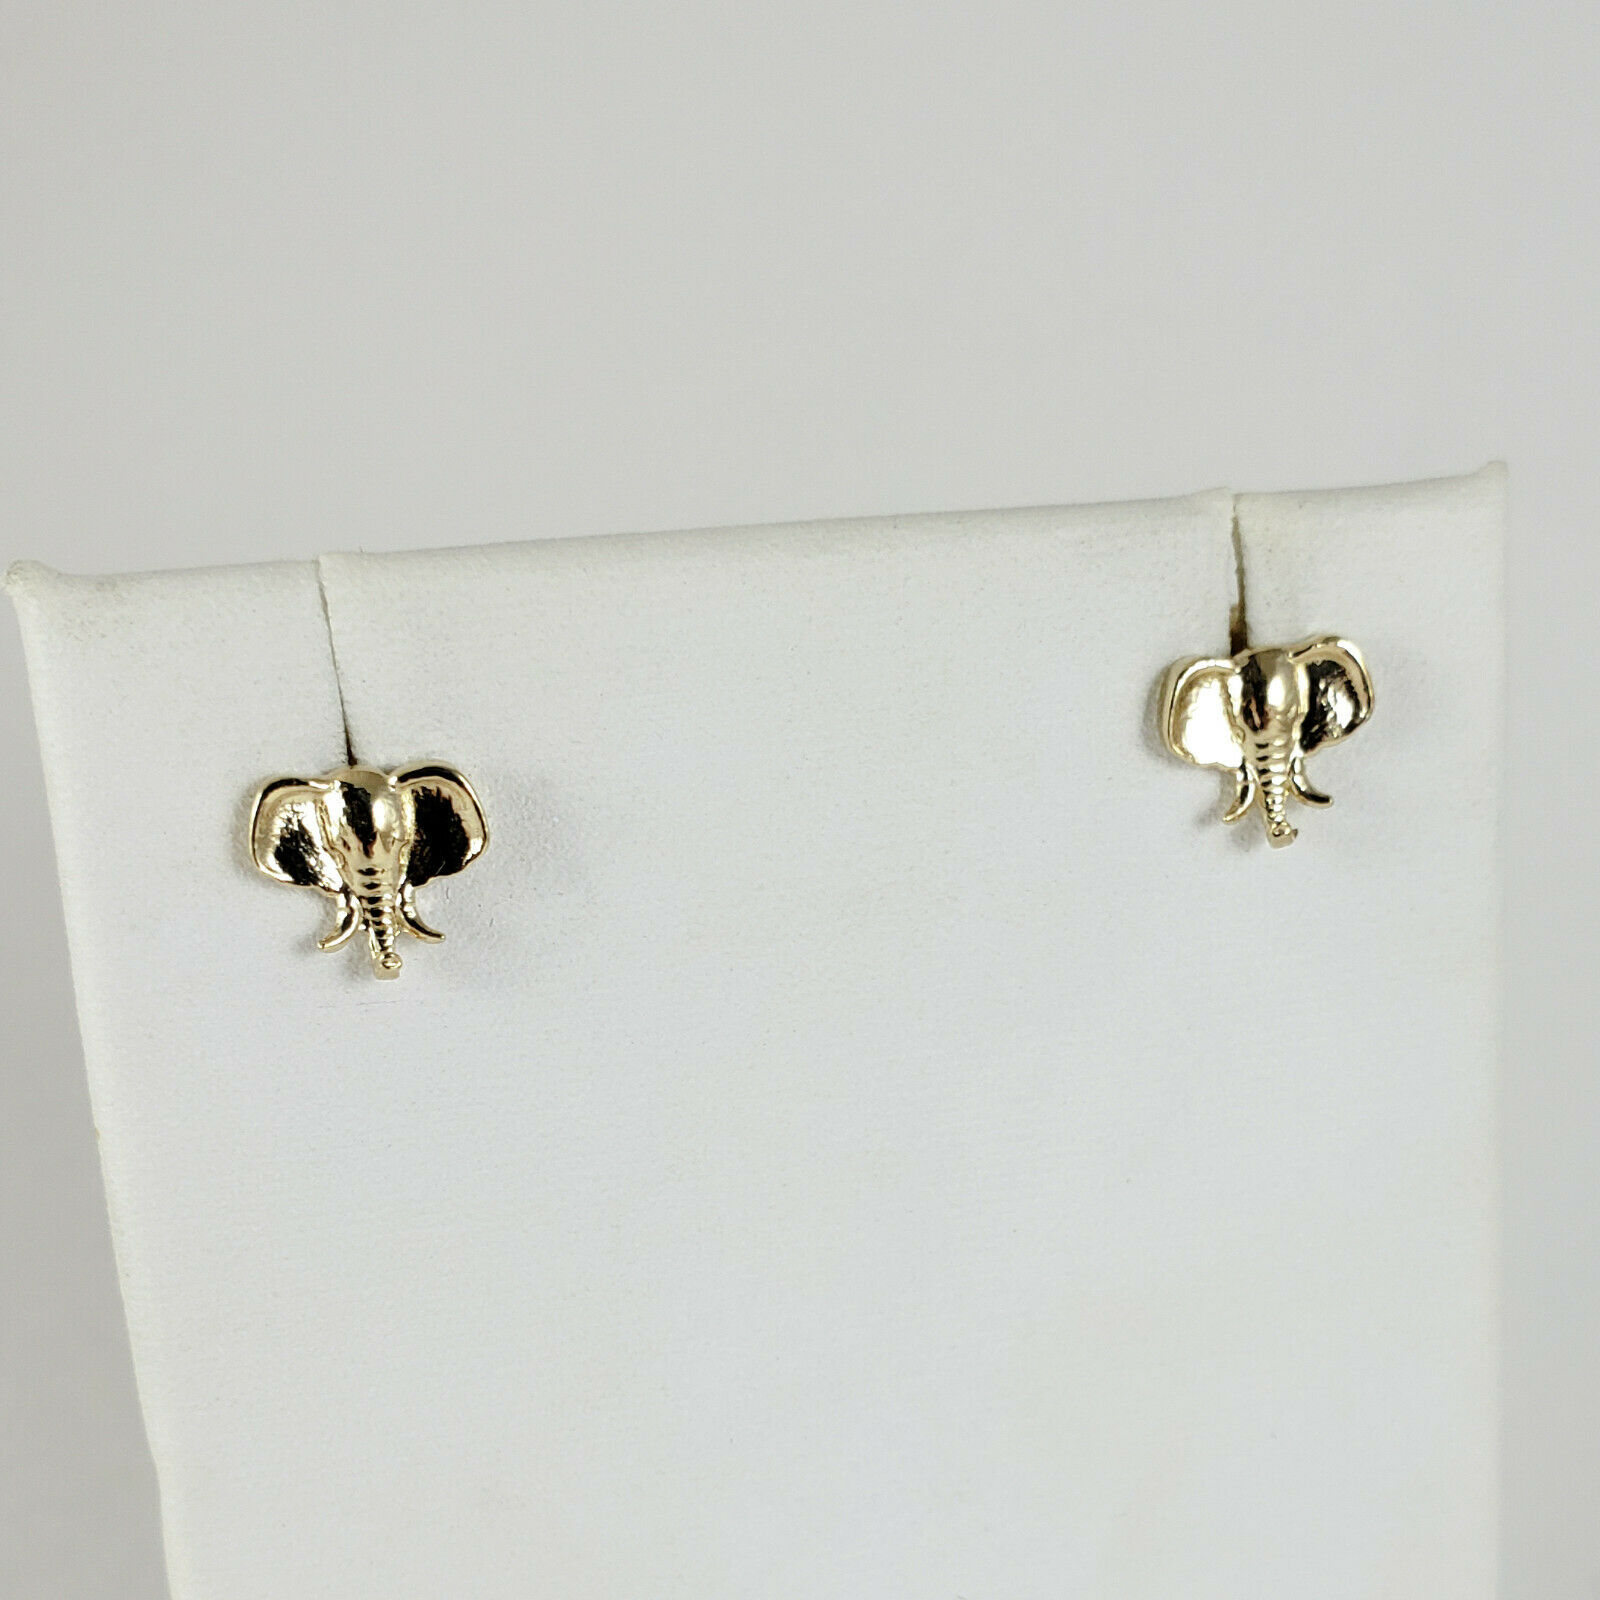 1.1 grams Small Details about   Solid 10K Yellow Gold Stud Earrings 9mm Elephant 